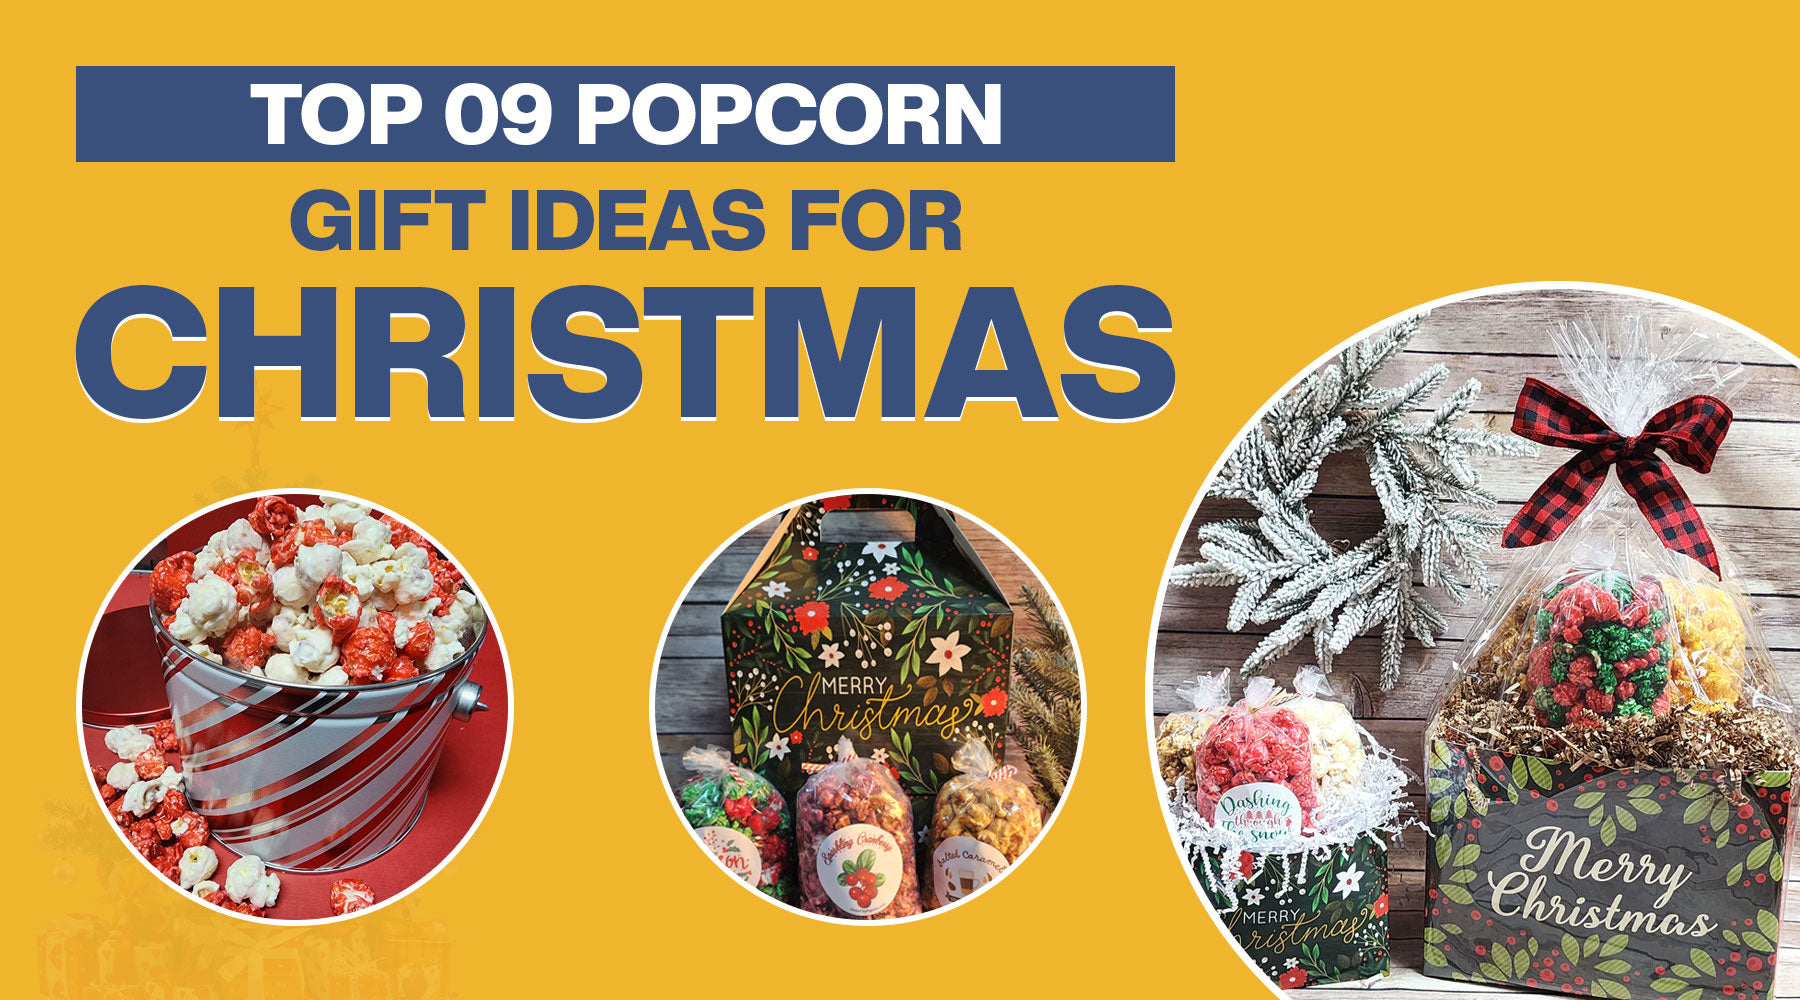 Top 9 Popcorn Gift Ideas for Christmas